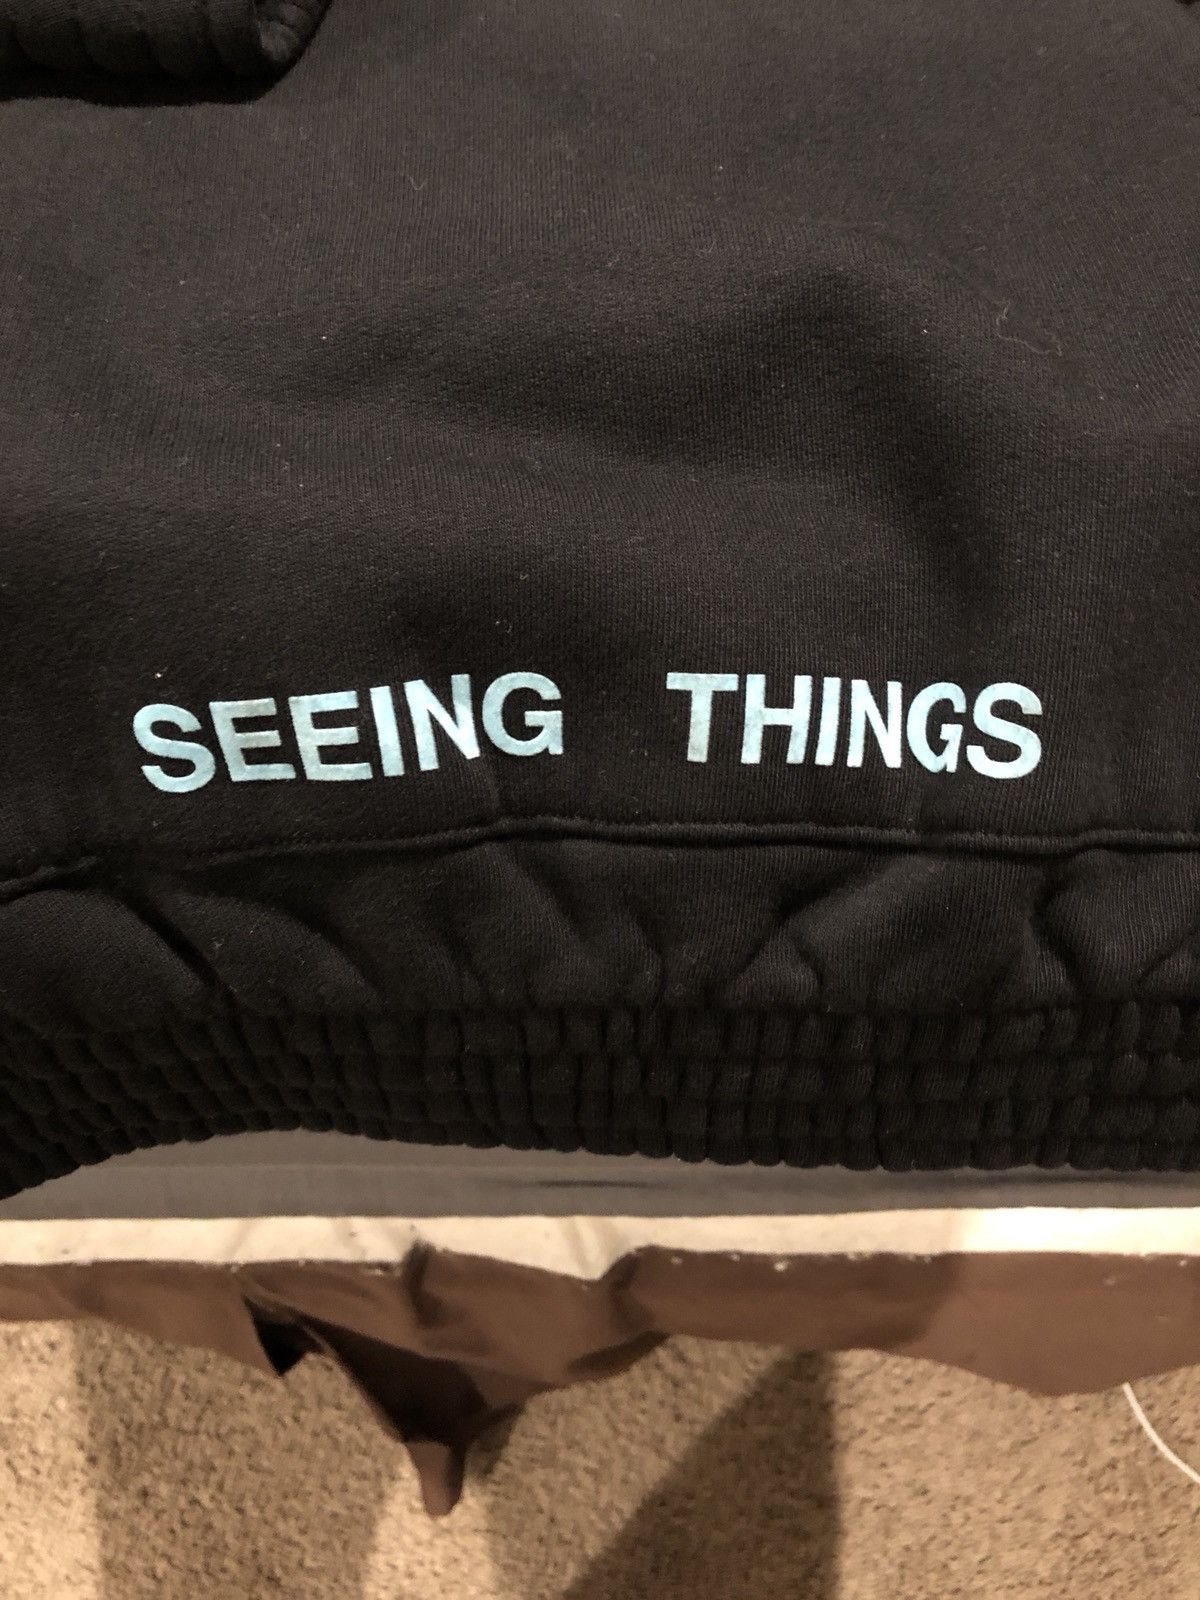 Off-White Seeing Things Birds Hoodie Size US S / EU 44-46 / 1 - 3 Thumbnail